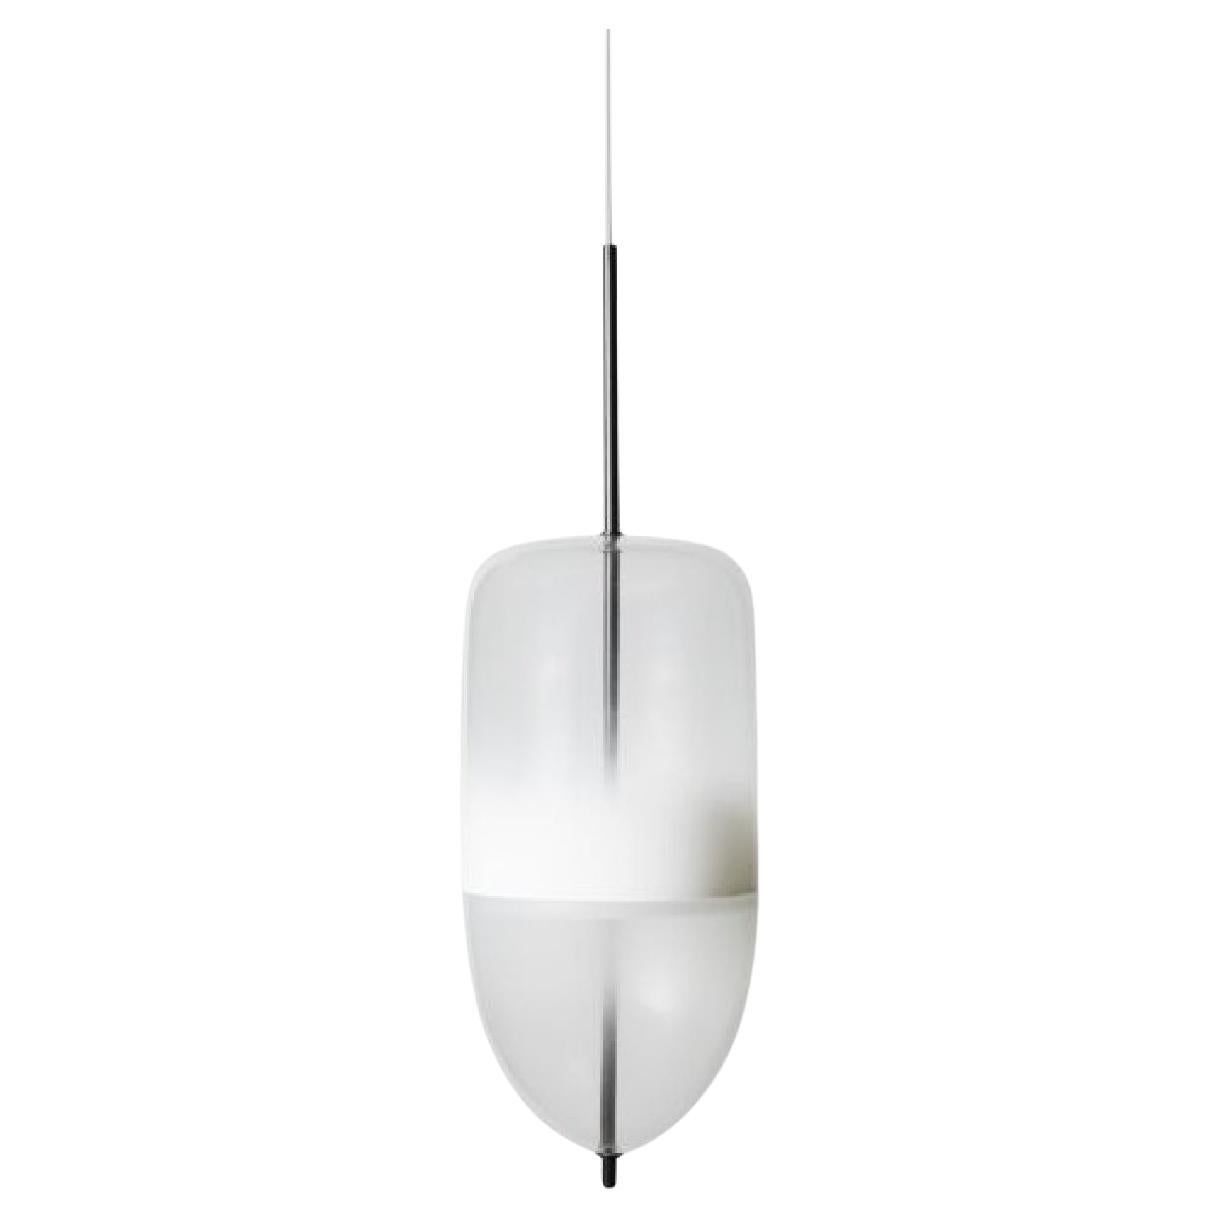 FLOW[T] S5 Pendant lamp in White by Nao Tamura for Wonderglass For Sale